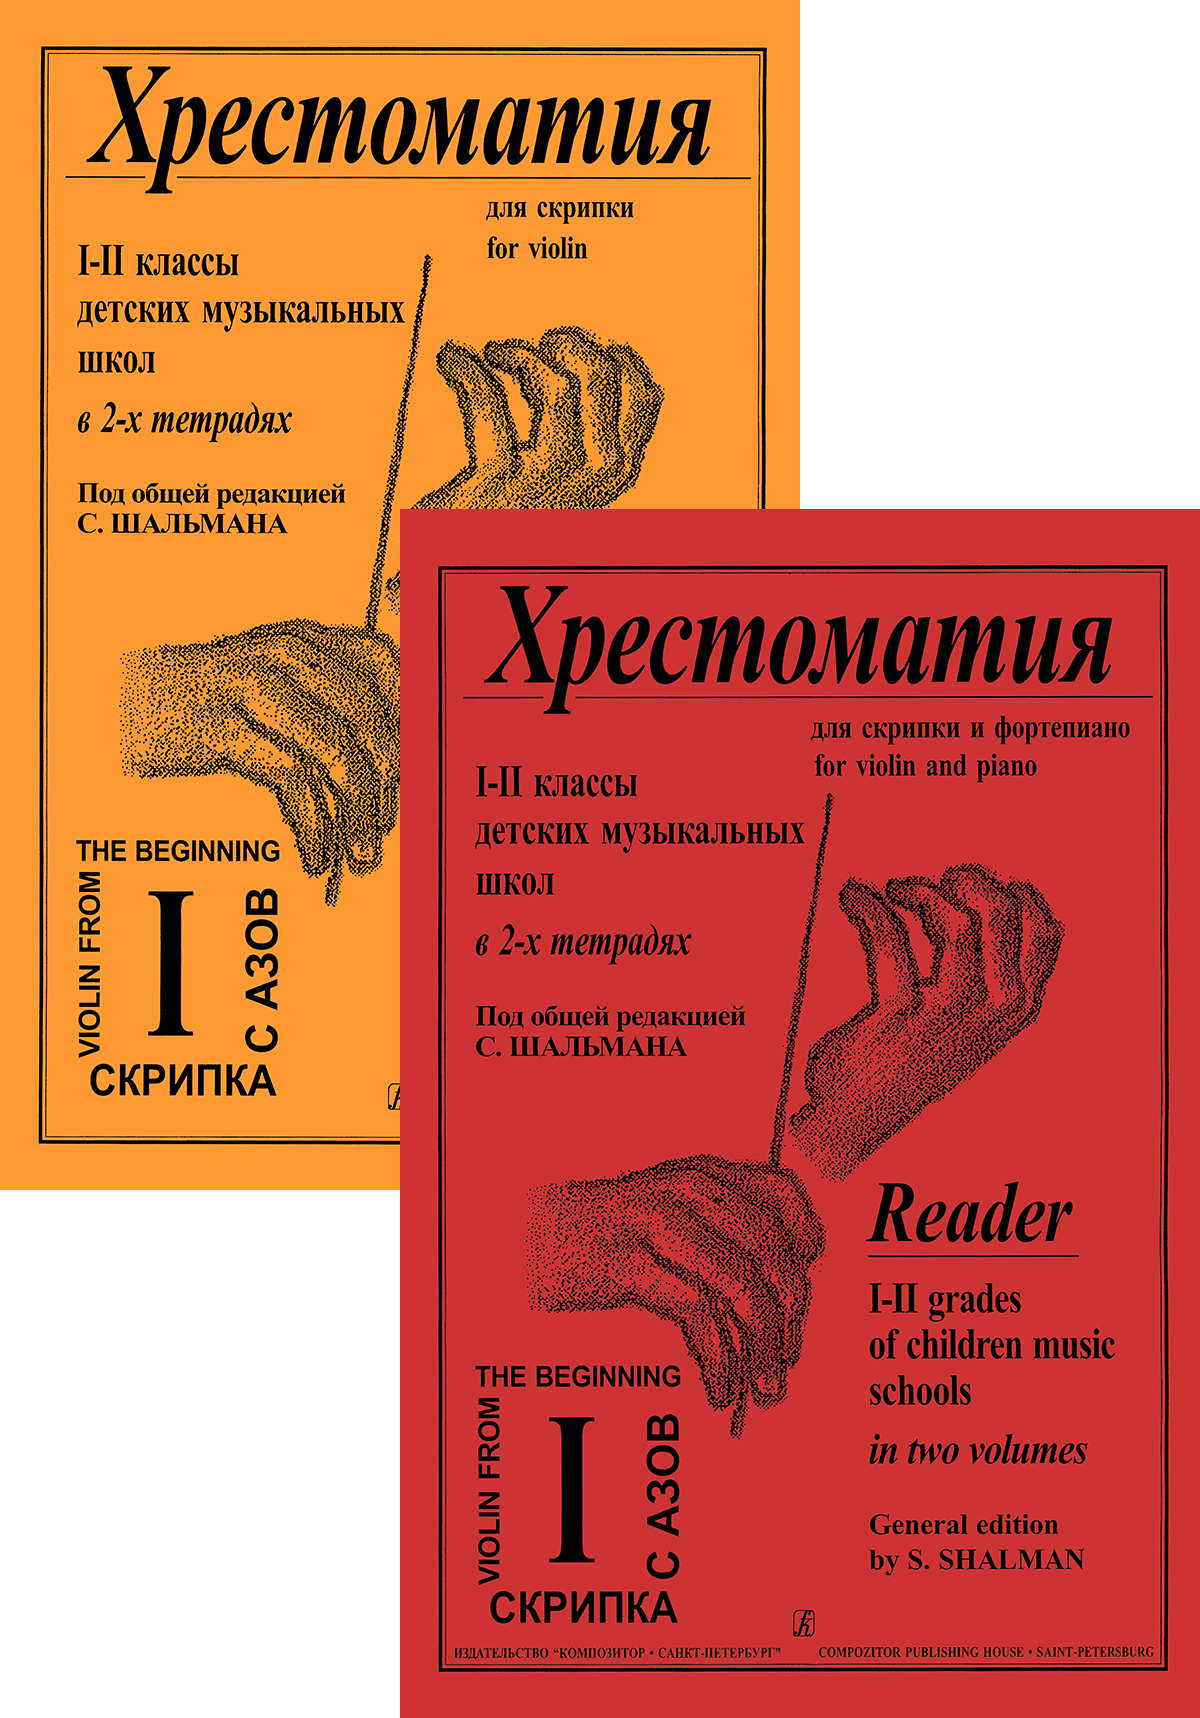 Schalman S. Сomp. Reader. Vol. 1. For 1–2 forms. For violin and piano